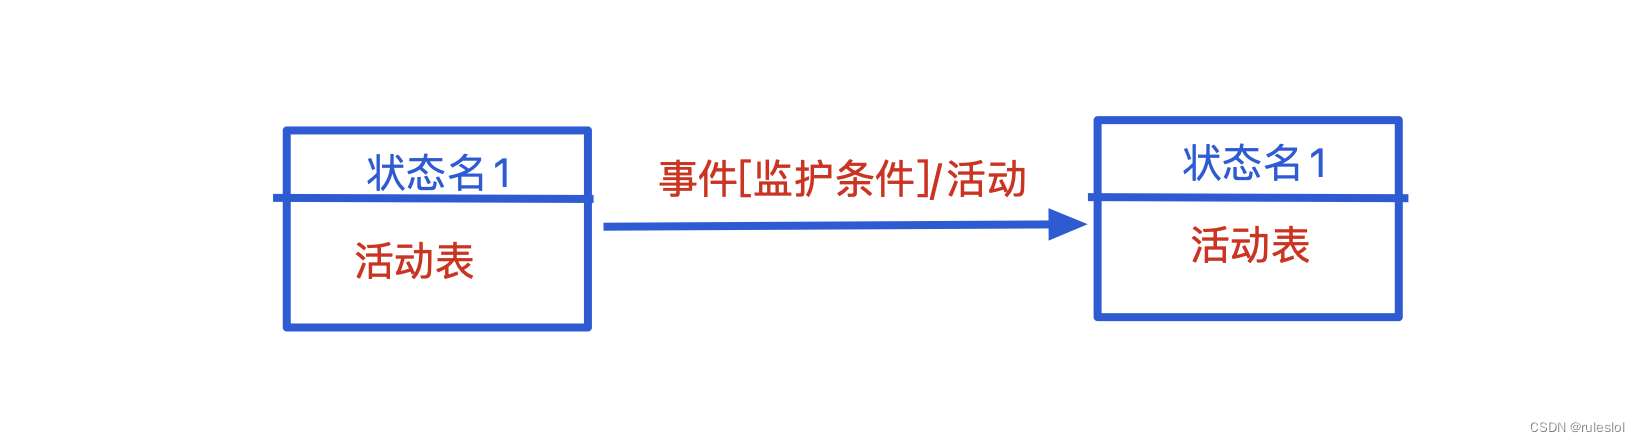 <span style='color:red;'>软</span><span style='color:red;'>考</span>72-上午题-【面向对象技术2-<span style='color:red;'>UML</span>】-<span style='color:red;'>UML</span><span style='color:red;'>中</span><span style='color:red;'>的</span><span style='color:red;'>图</span>3